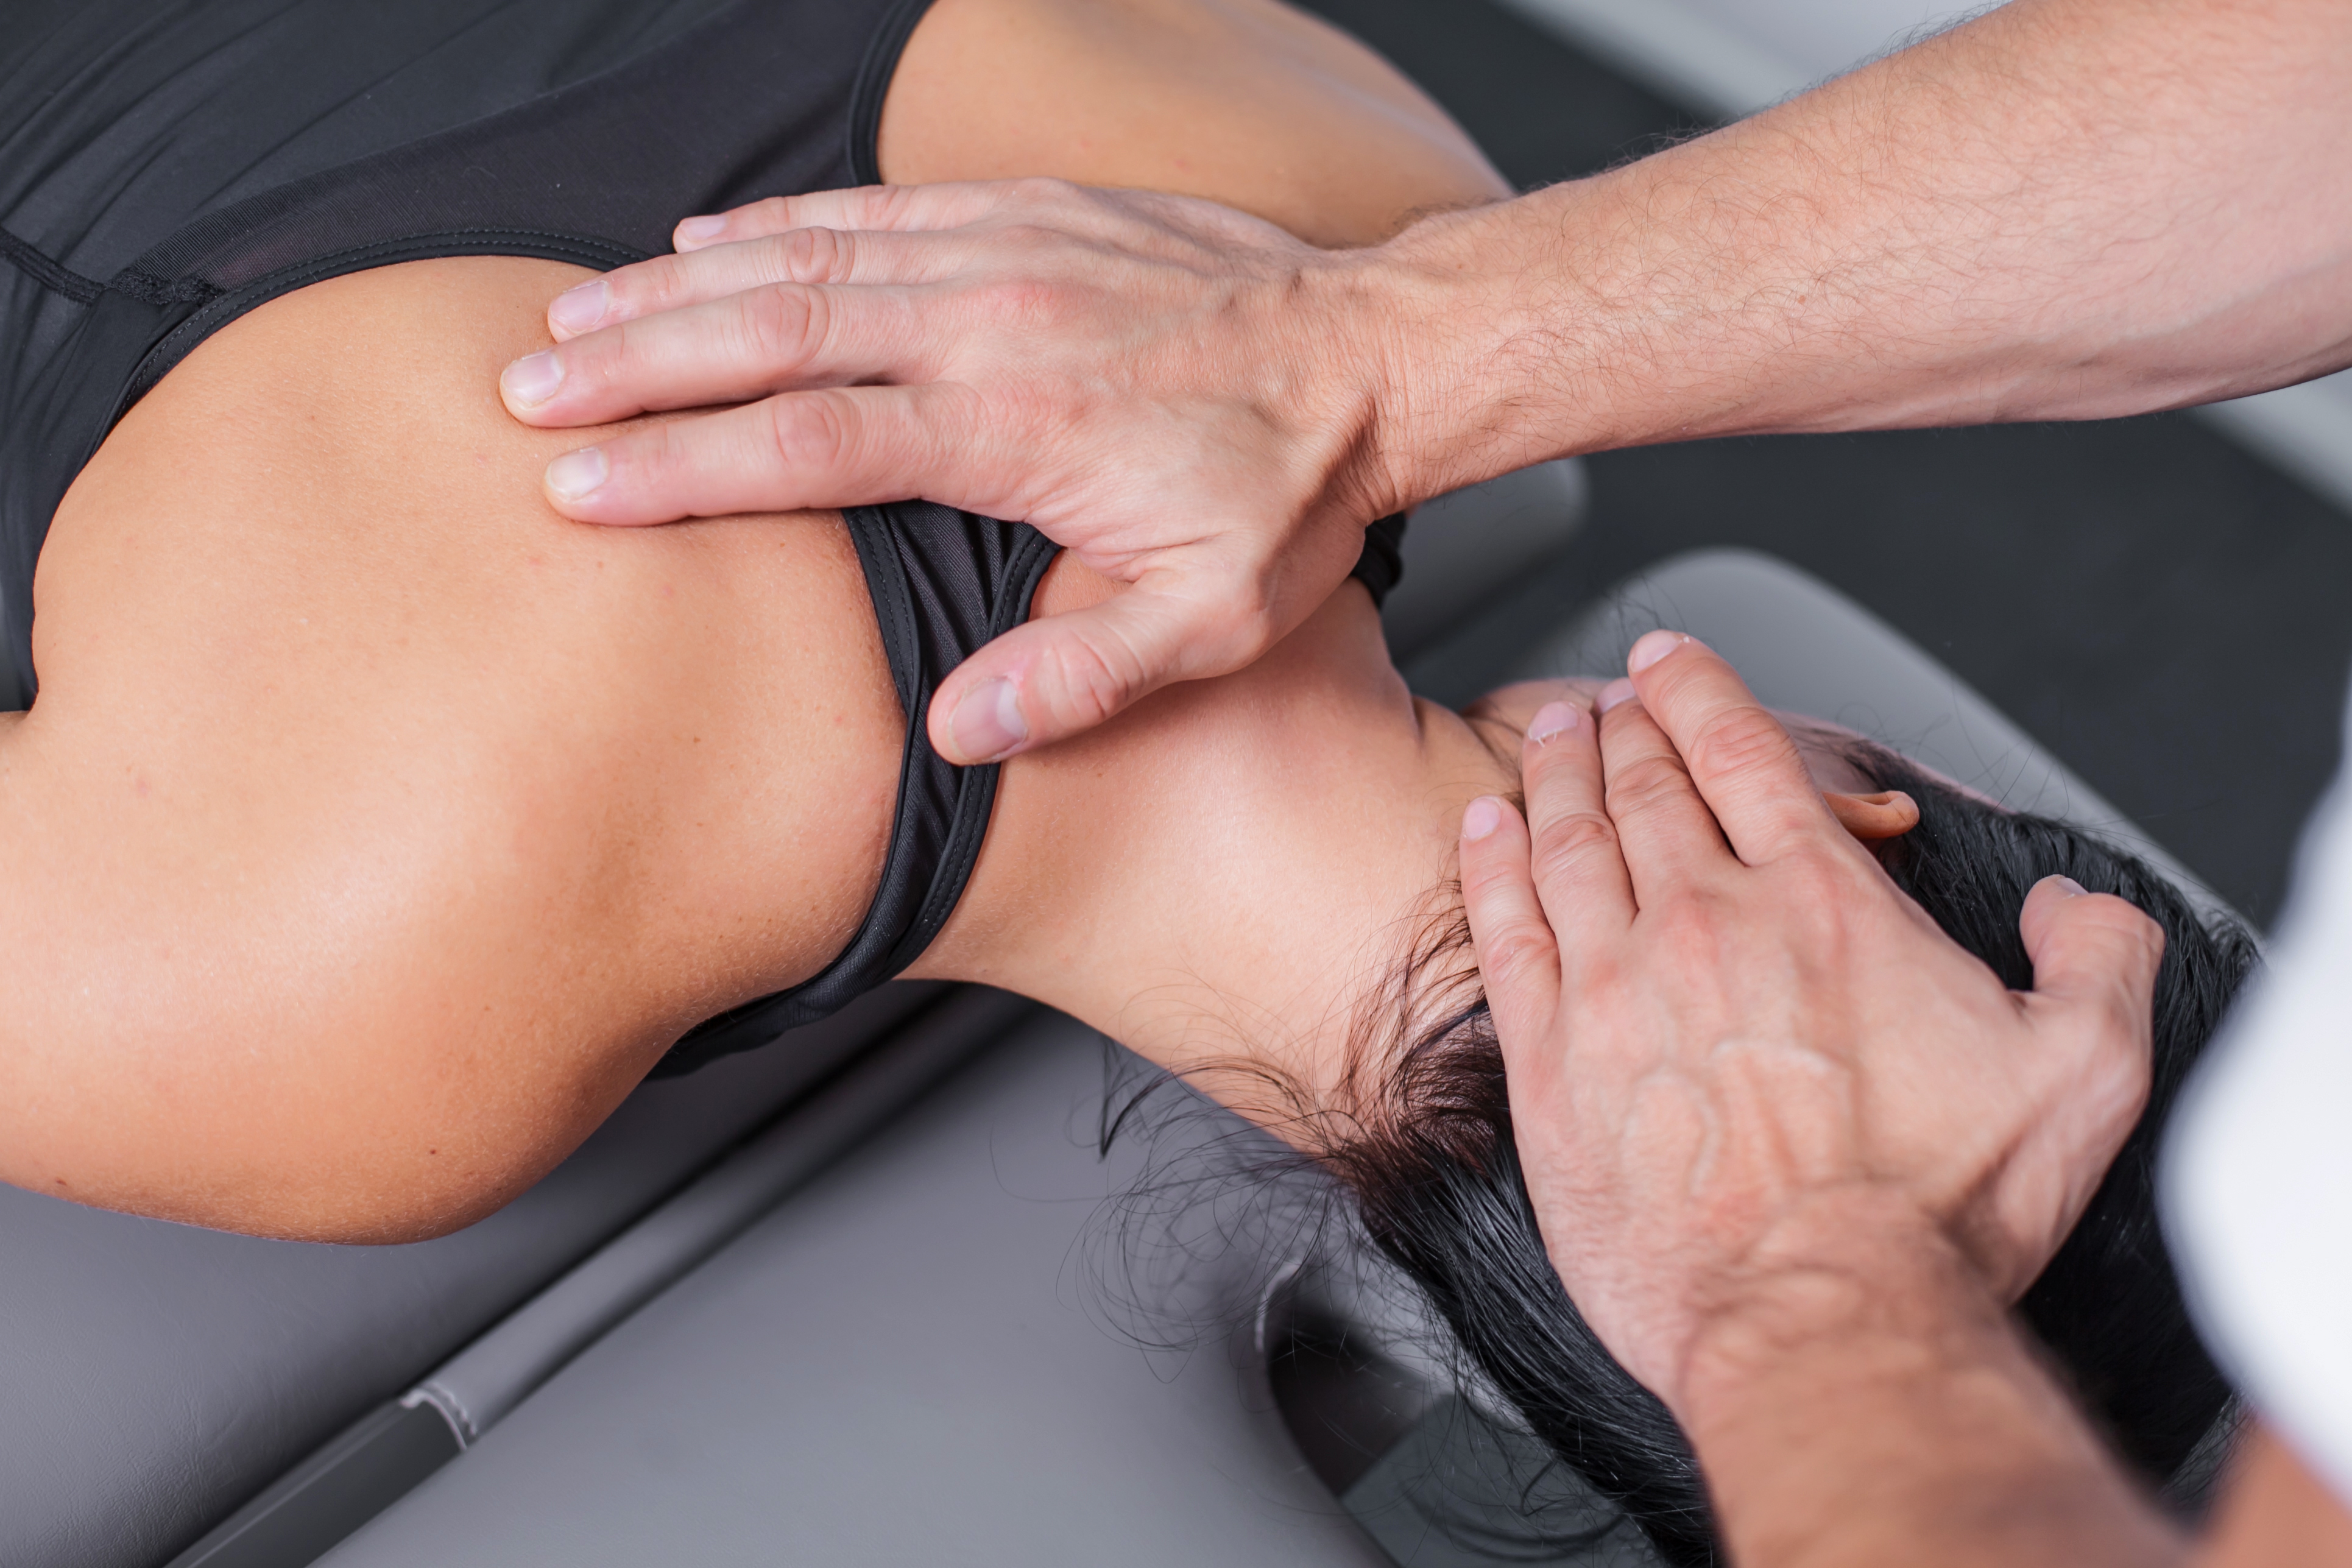 Muscle and soft tissue strains, spasms, imbalances, impingements Nerve irritation eg sciatica Joint aches and pain as a result of disease, wear and tear, overuse, sprains and strains, sport and repetitive strain injuries (RSI’s) posture, work-station issues to a name just a few Acute injuries such as whiplash, slips and falls or sudden over-loading Pre and post-spinal surgery